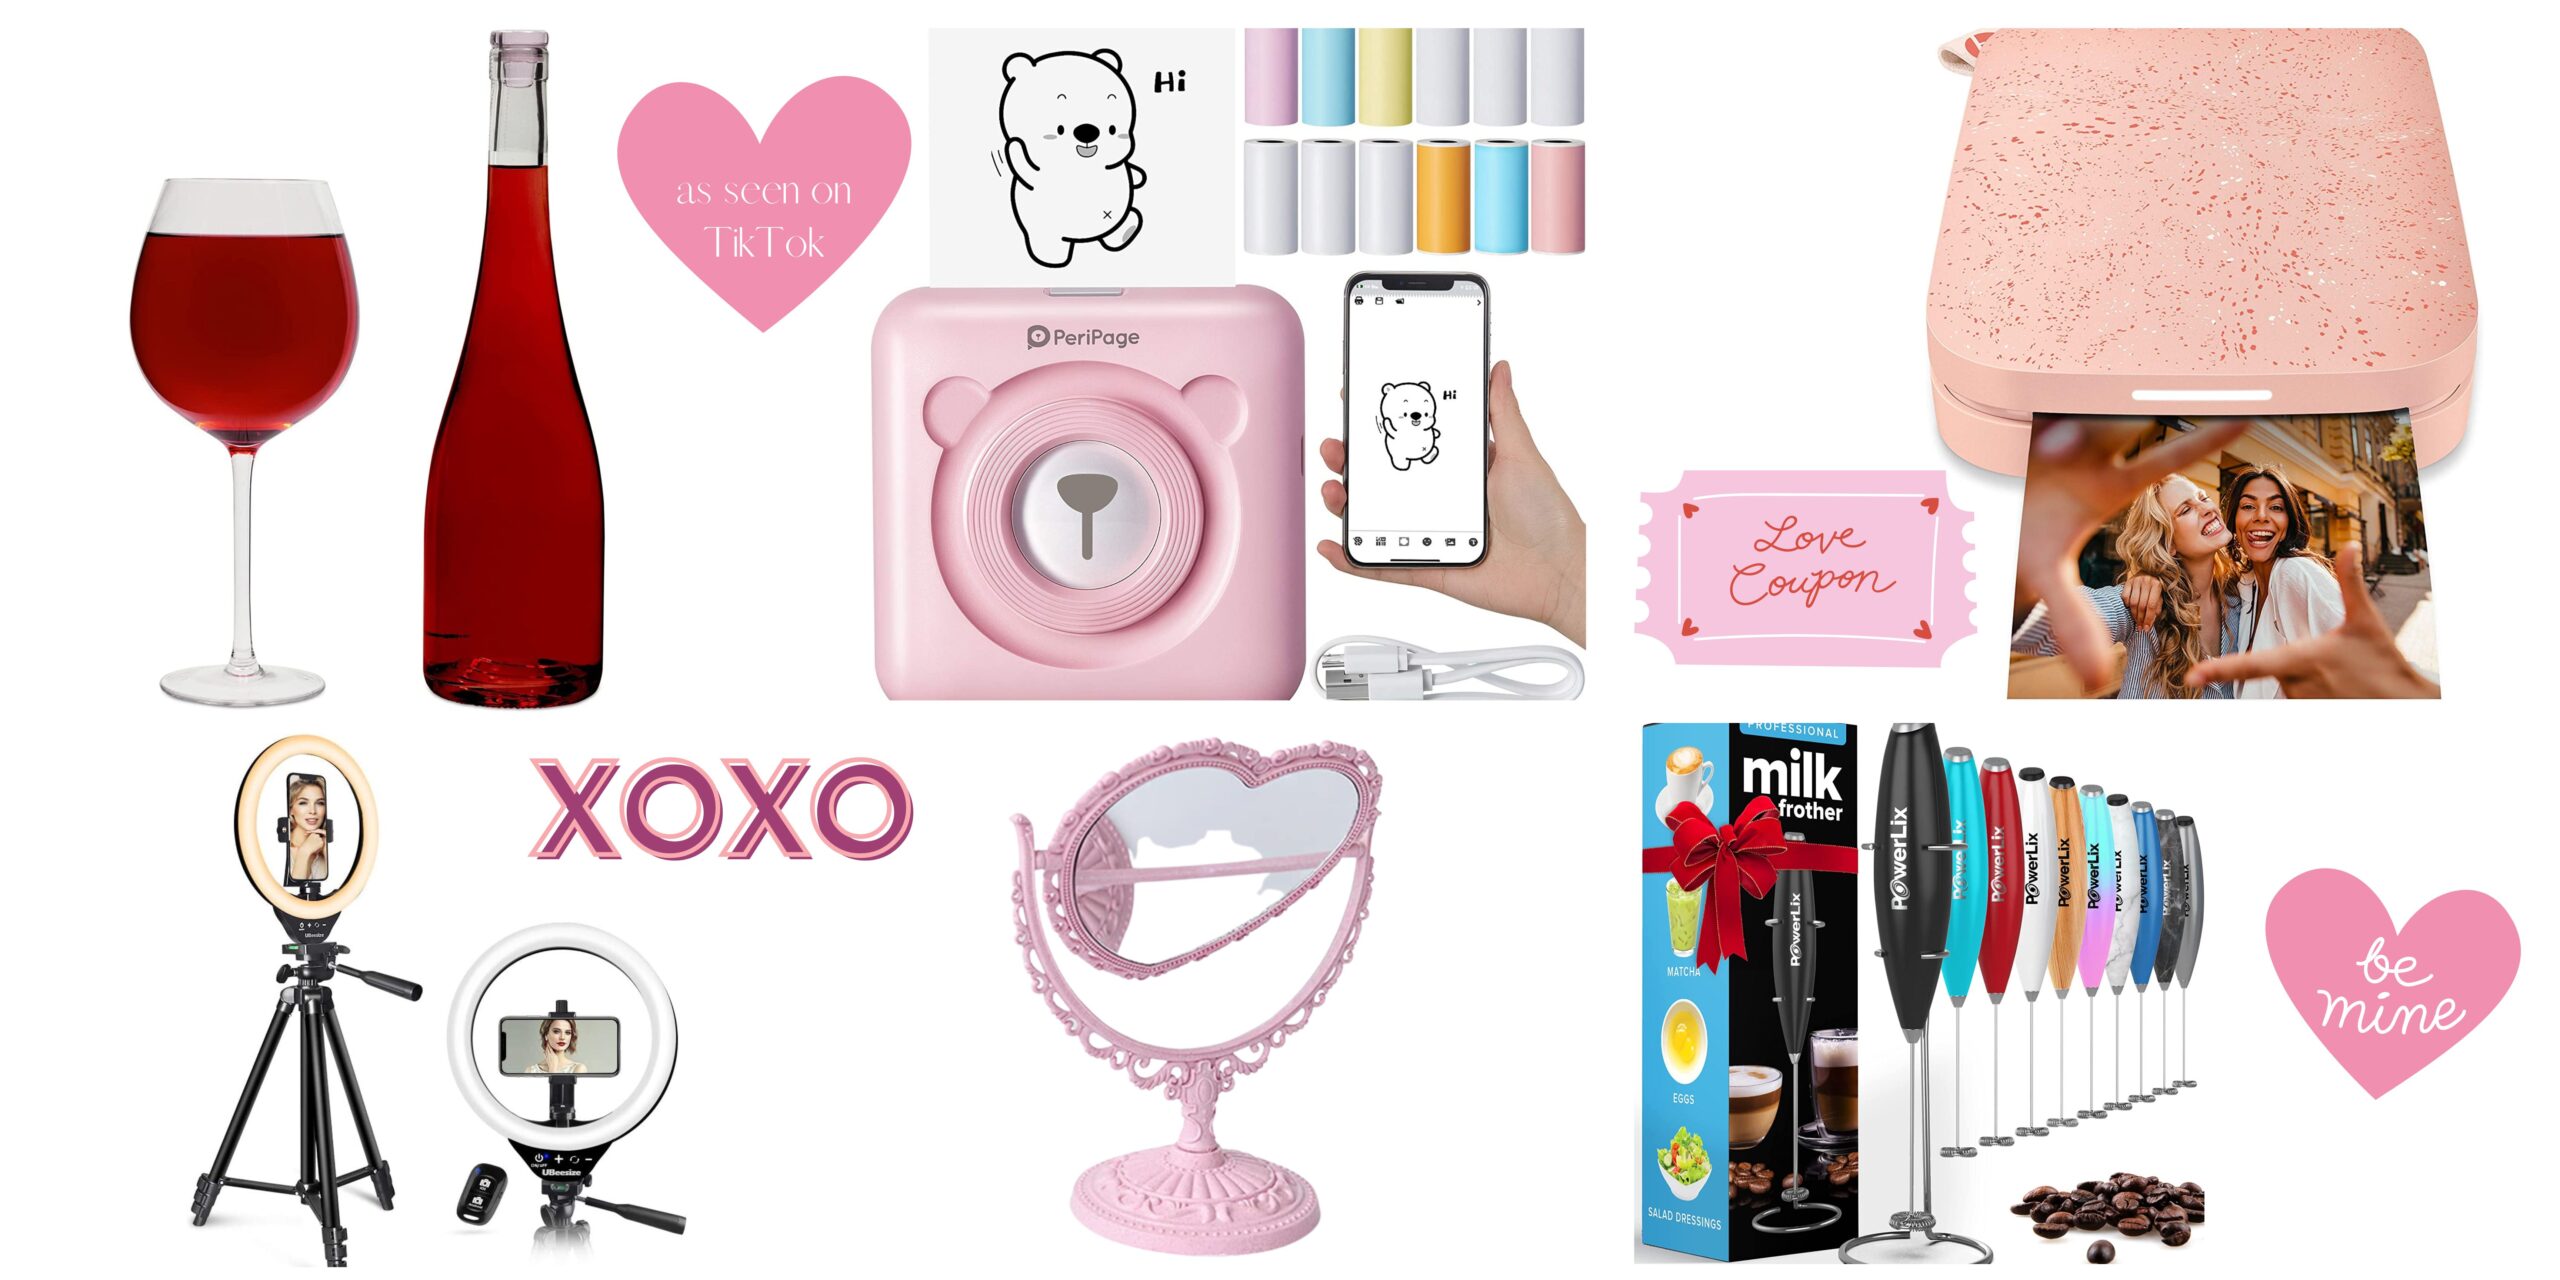 tiktok gift ideas for valentines day feature image